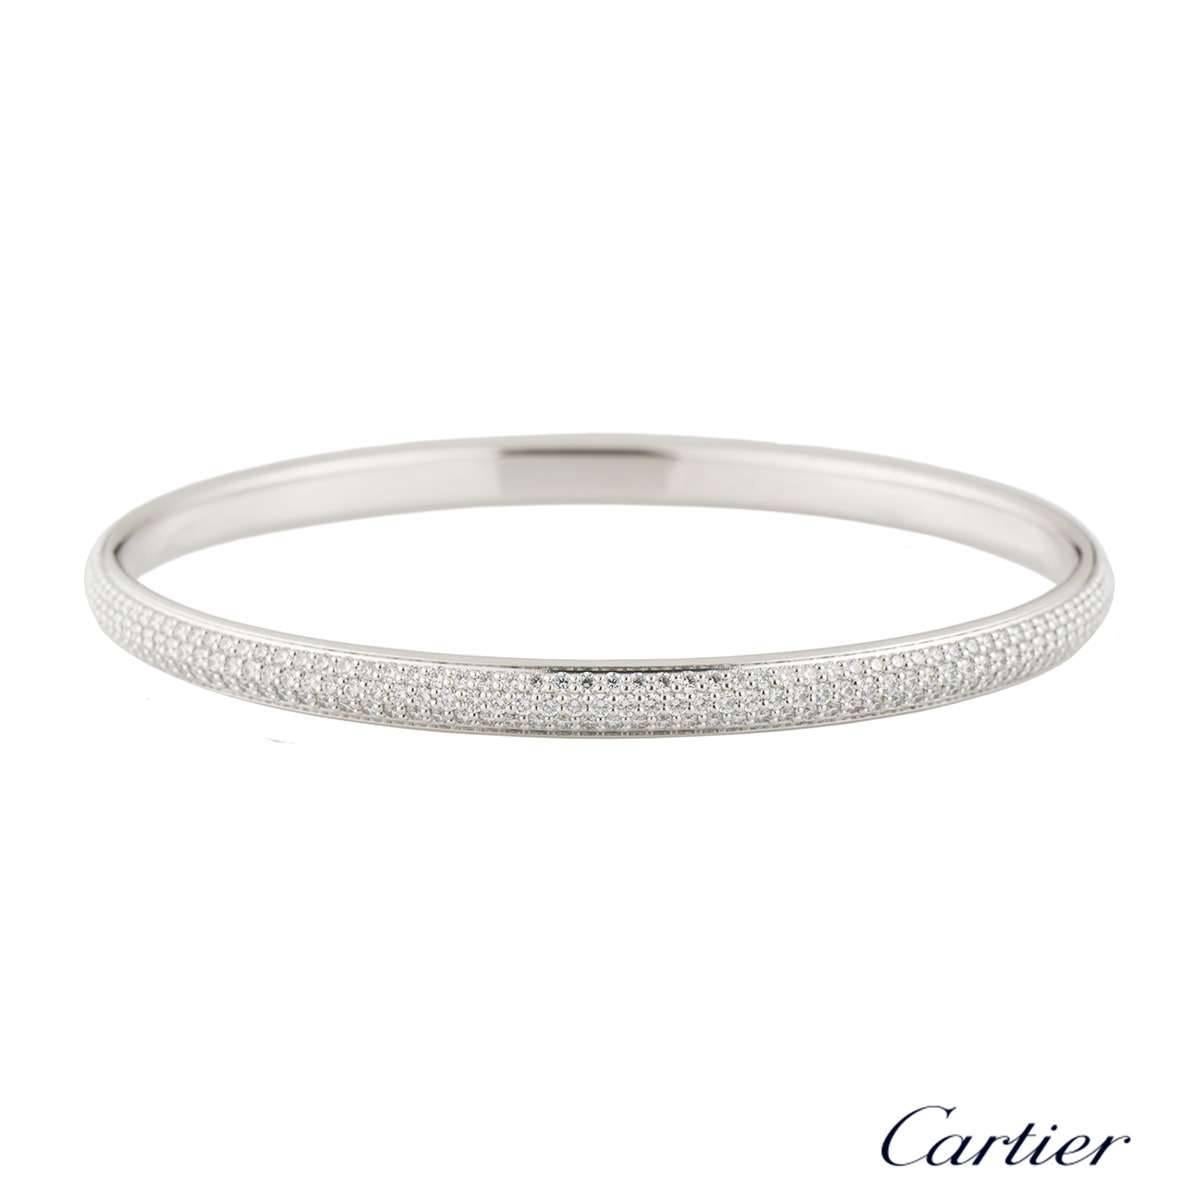 A stunning diamond set bangle by Cartier. The bangle is set with 3 rows of round brilliant cut claw set diamonds totalling approximately 4.05ct. The diamonds are predominantly F colour and VS+ clarity. The bangle is 5mm in width and would fit a